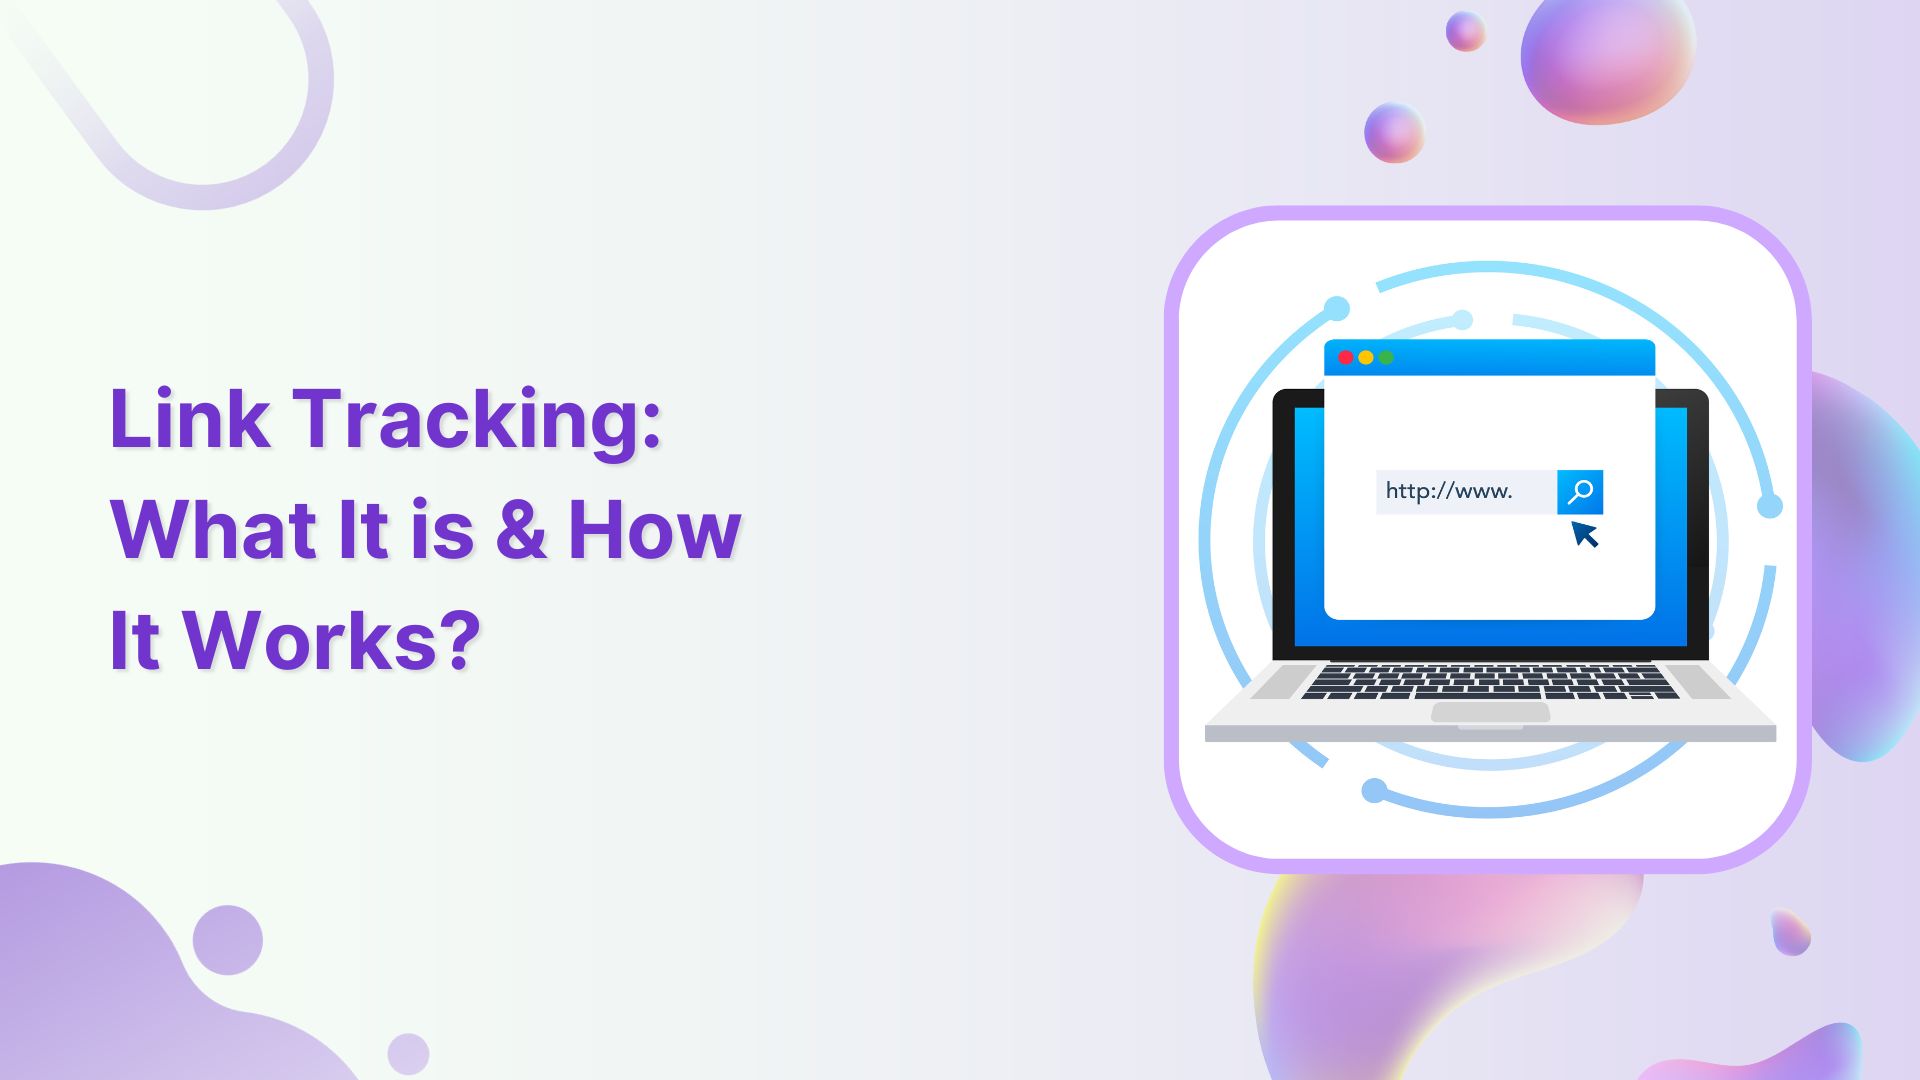 Link Tracking: What It is and How It Works?